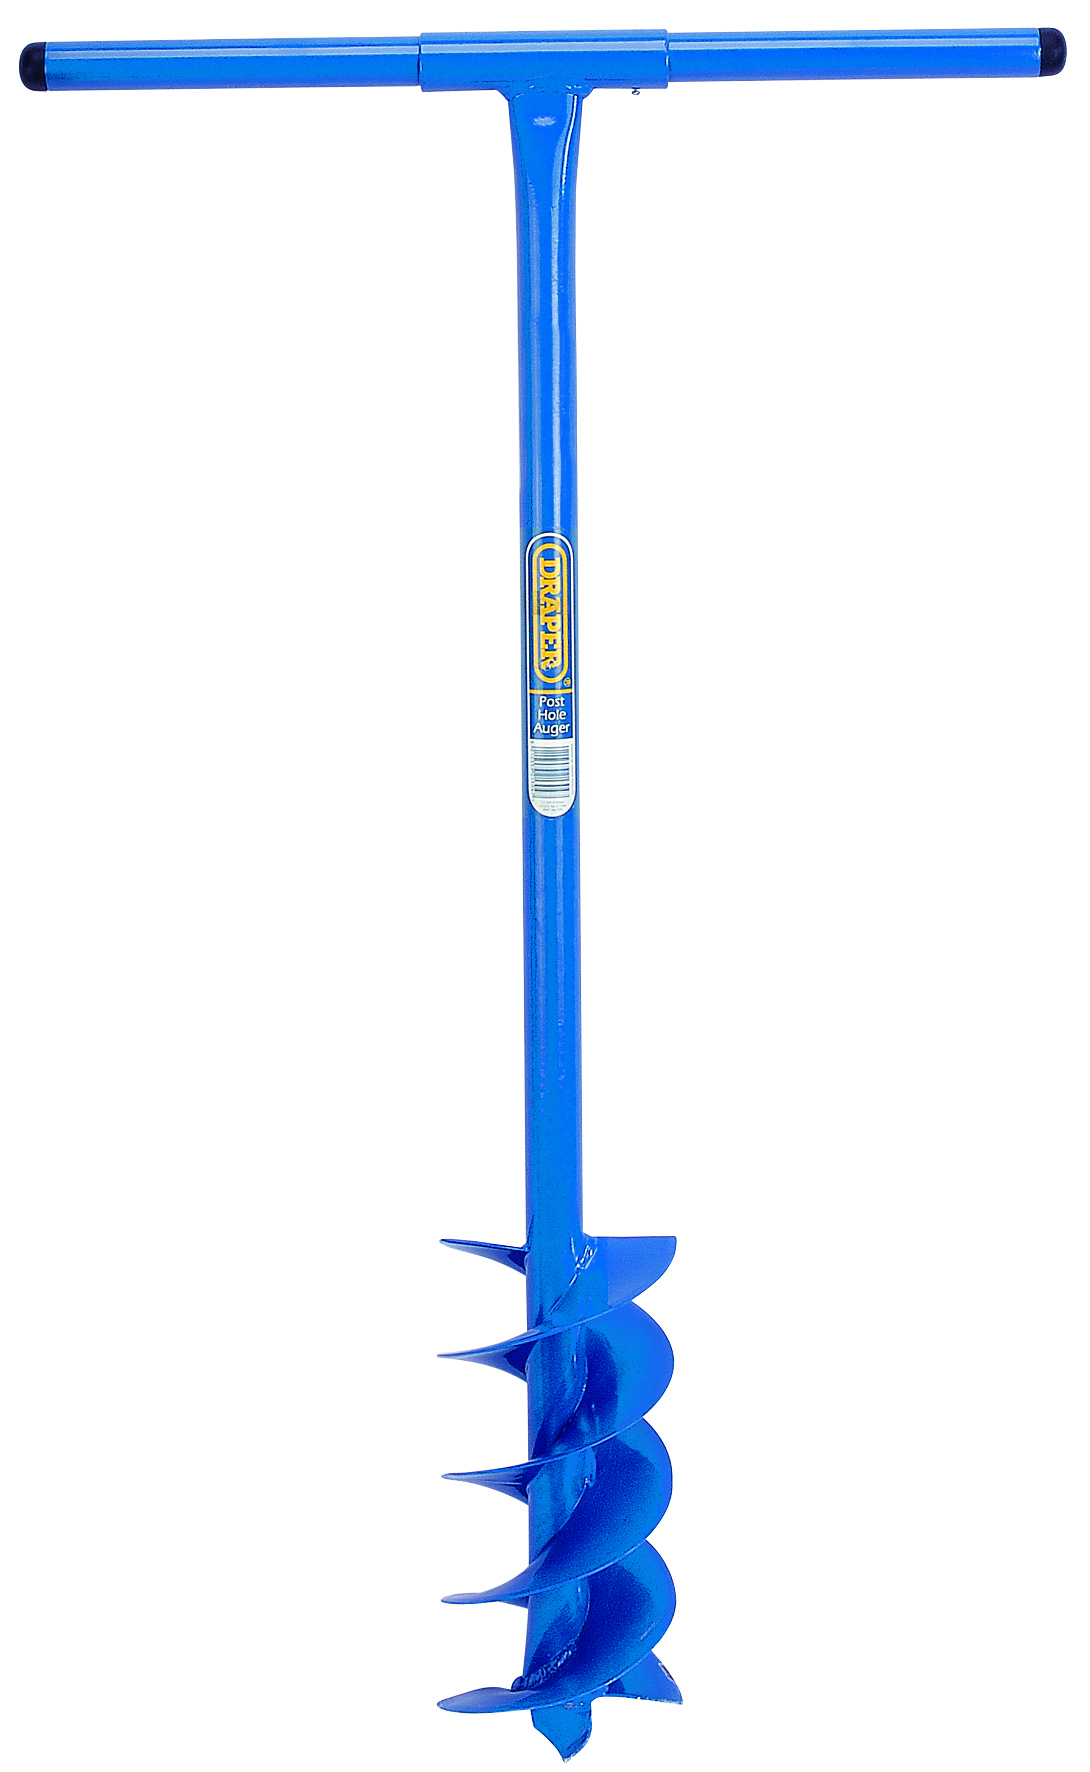 Draper FPA4 Fence Post Hole Auger - 950 x 100mm